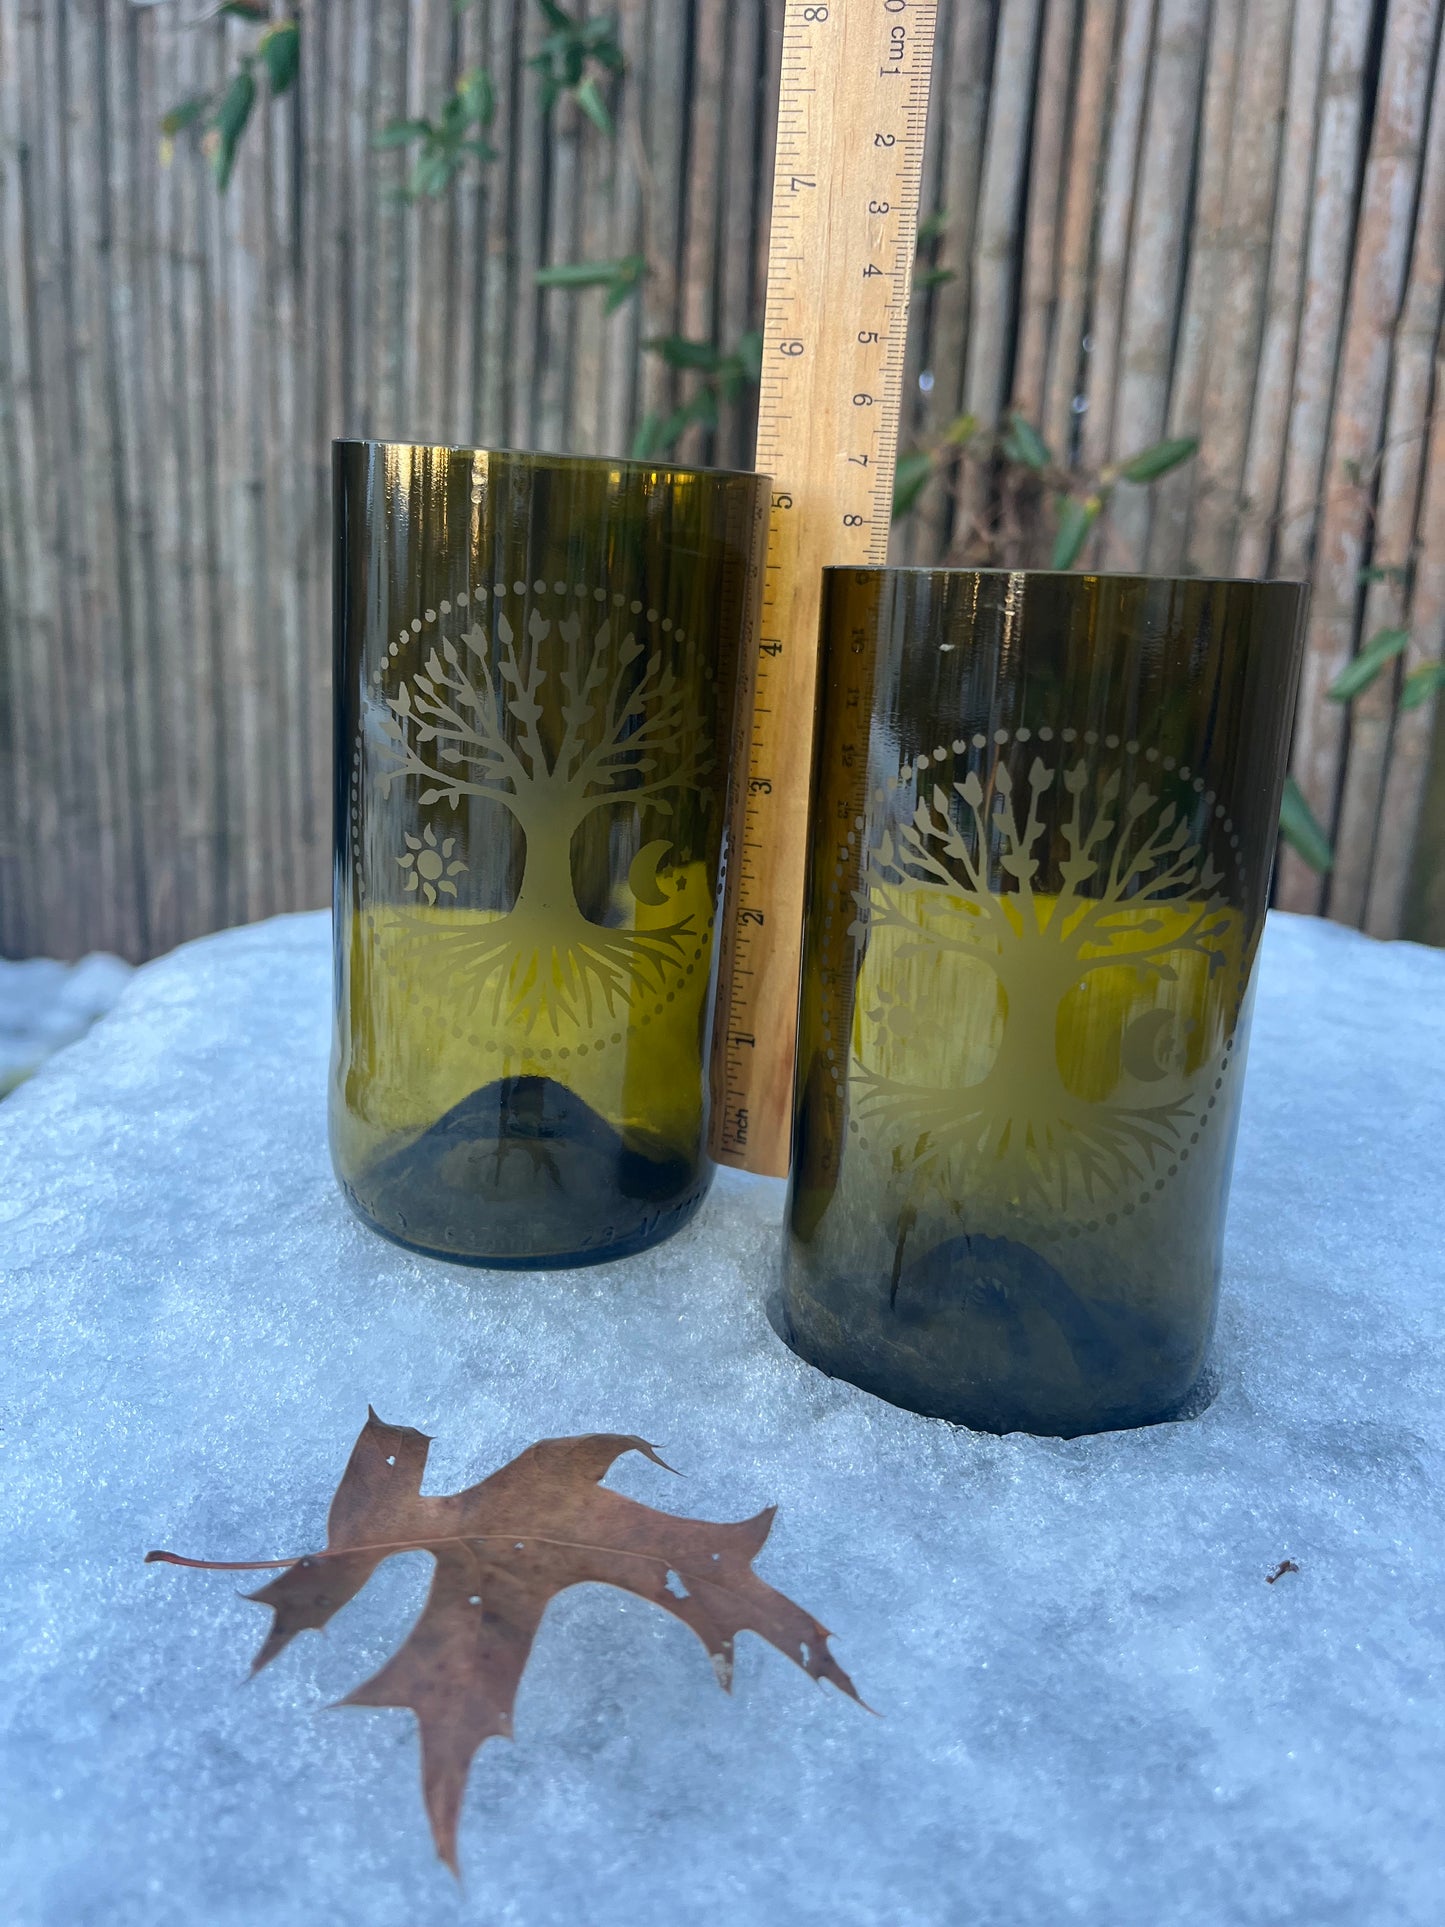 Re-Wined Up-Cycled Drinking Glasses